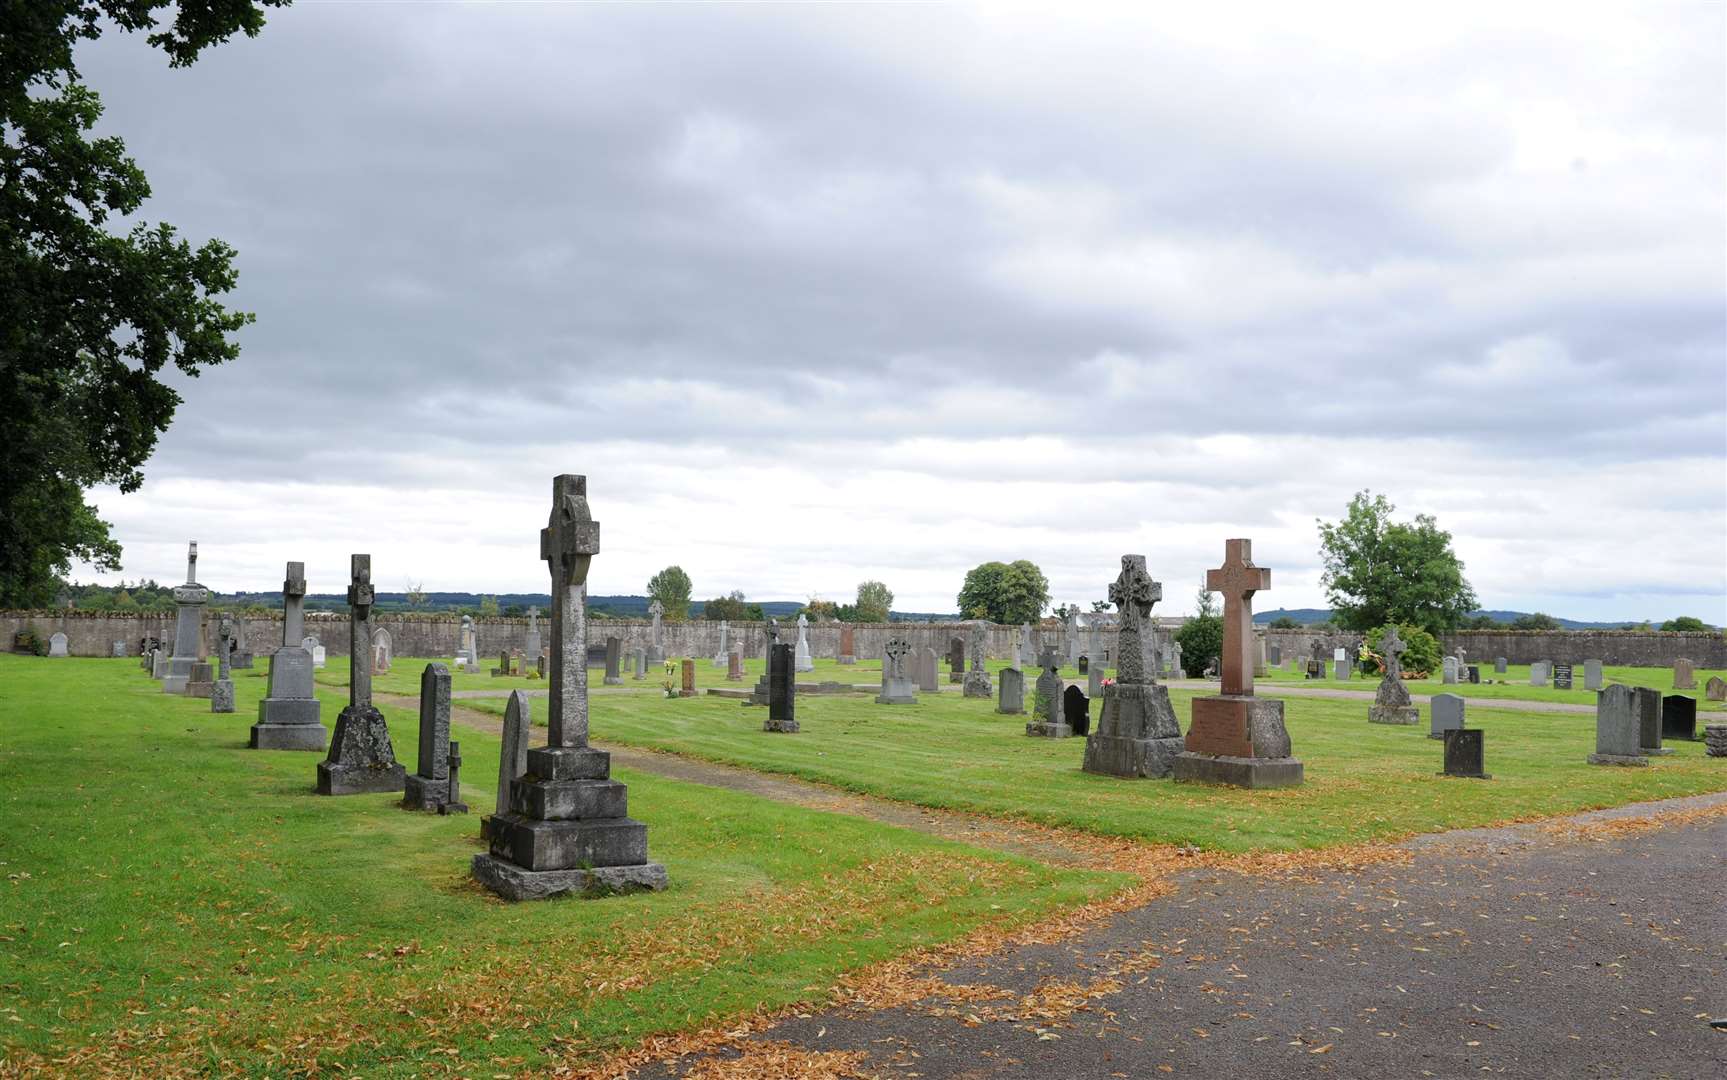 The cost of lairs at cemeteries will rise by five per cent, pictured here is St Mary's Catholic Church in Beauly.